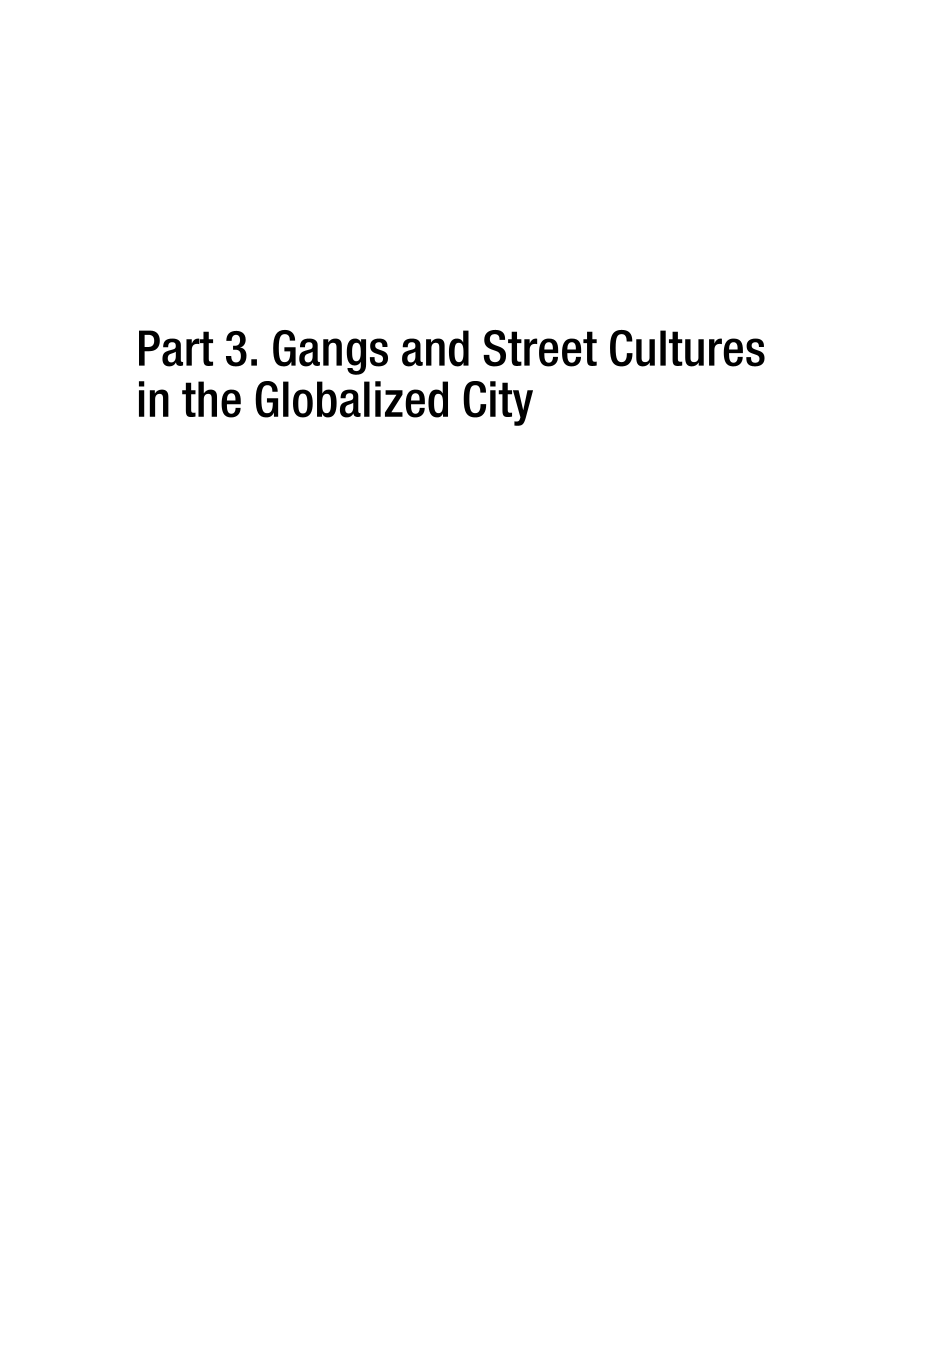 Globalizing the Streets: Cross-Cultural Perspectives on Youth, Social Control, and Empowerment page 93